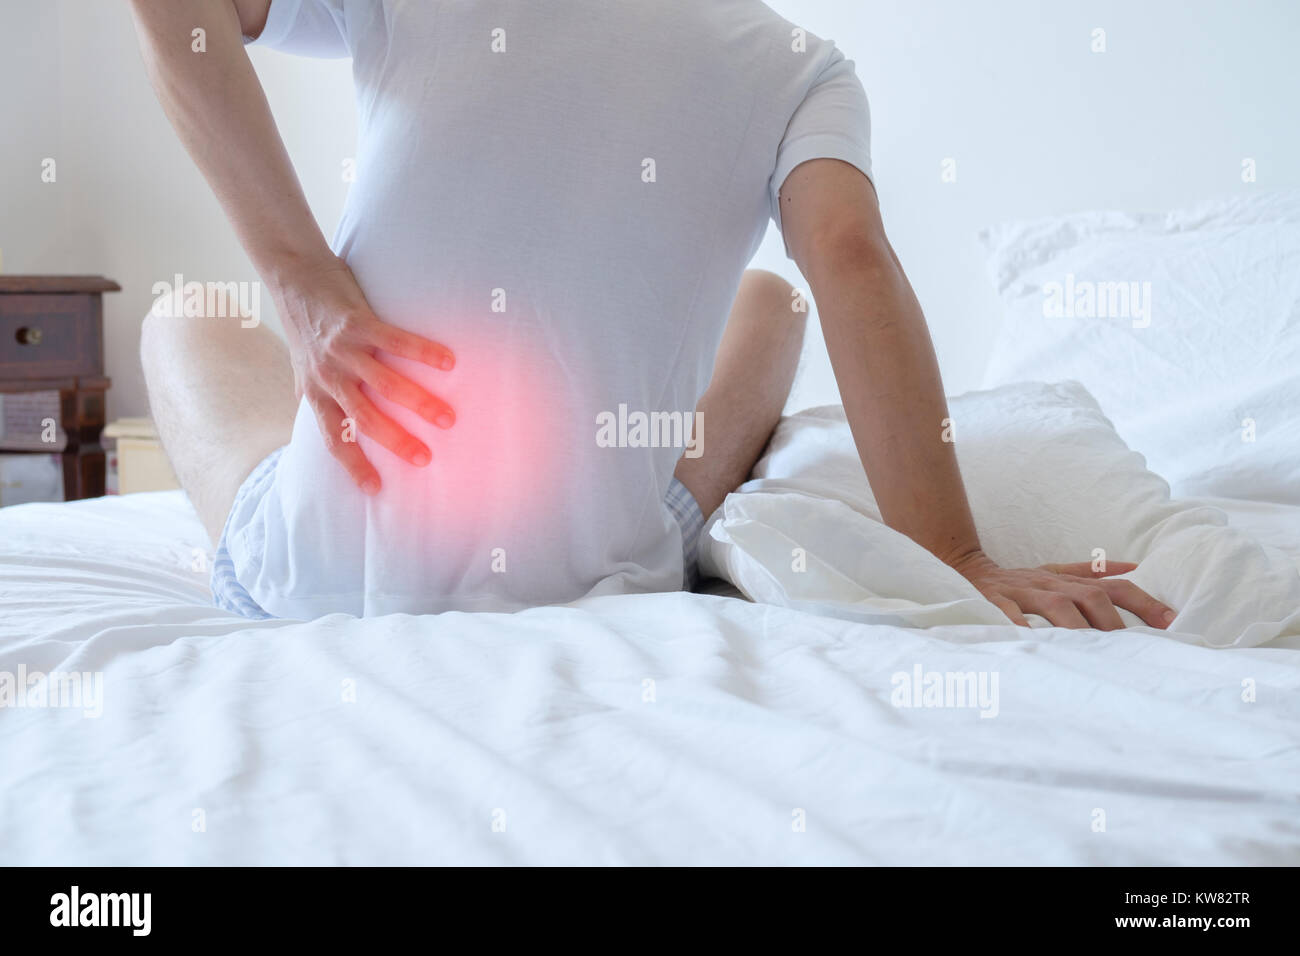 Man feeling back ache in the bed after sleeping Stock Photo